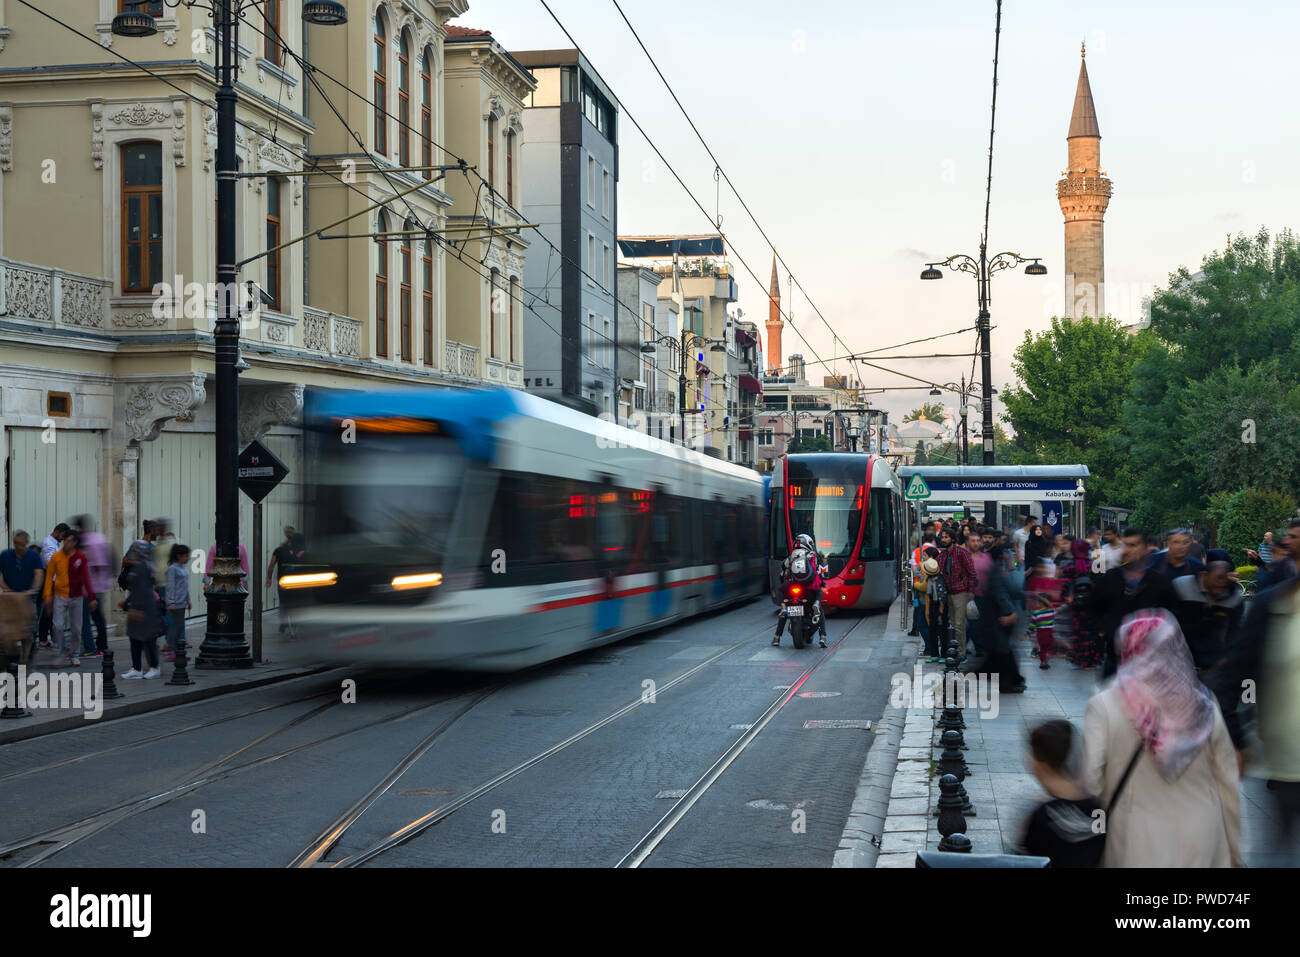 Sultanahmet T1 tram station with trams arriving and departing as people queue, Istanbul, Turkey Stock Photo